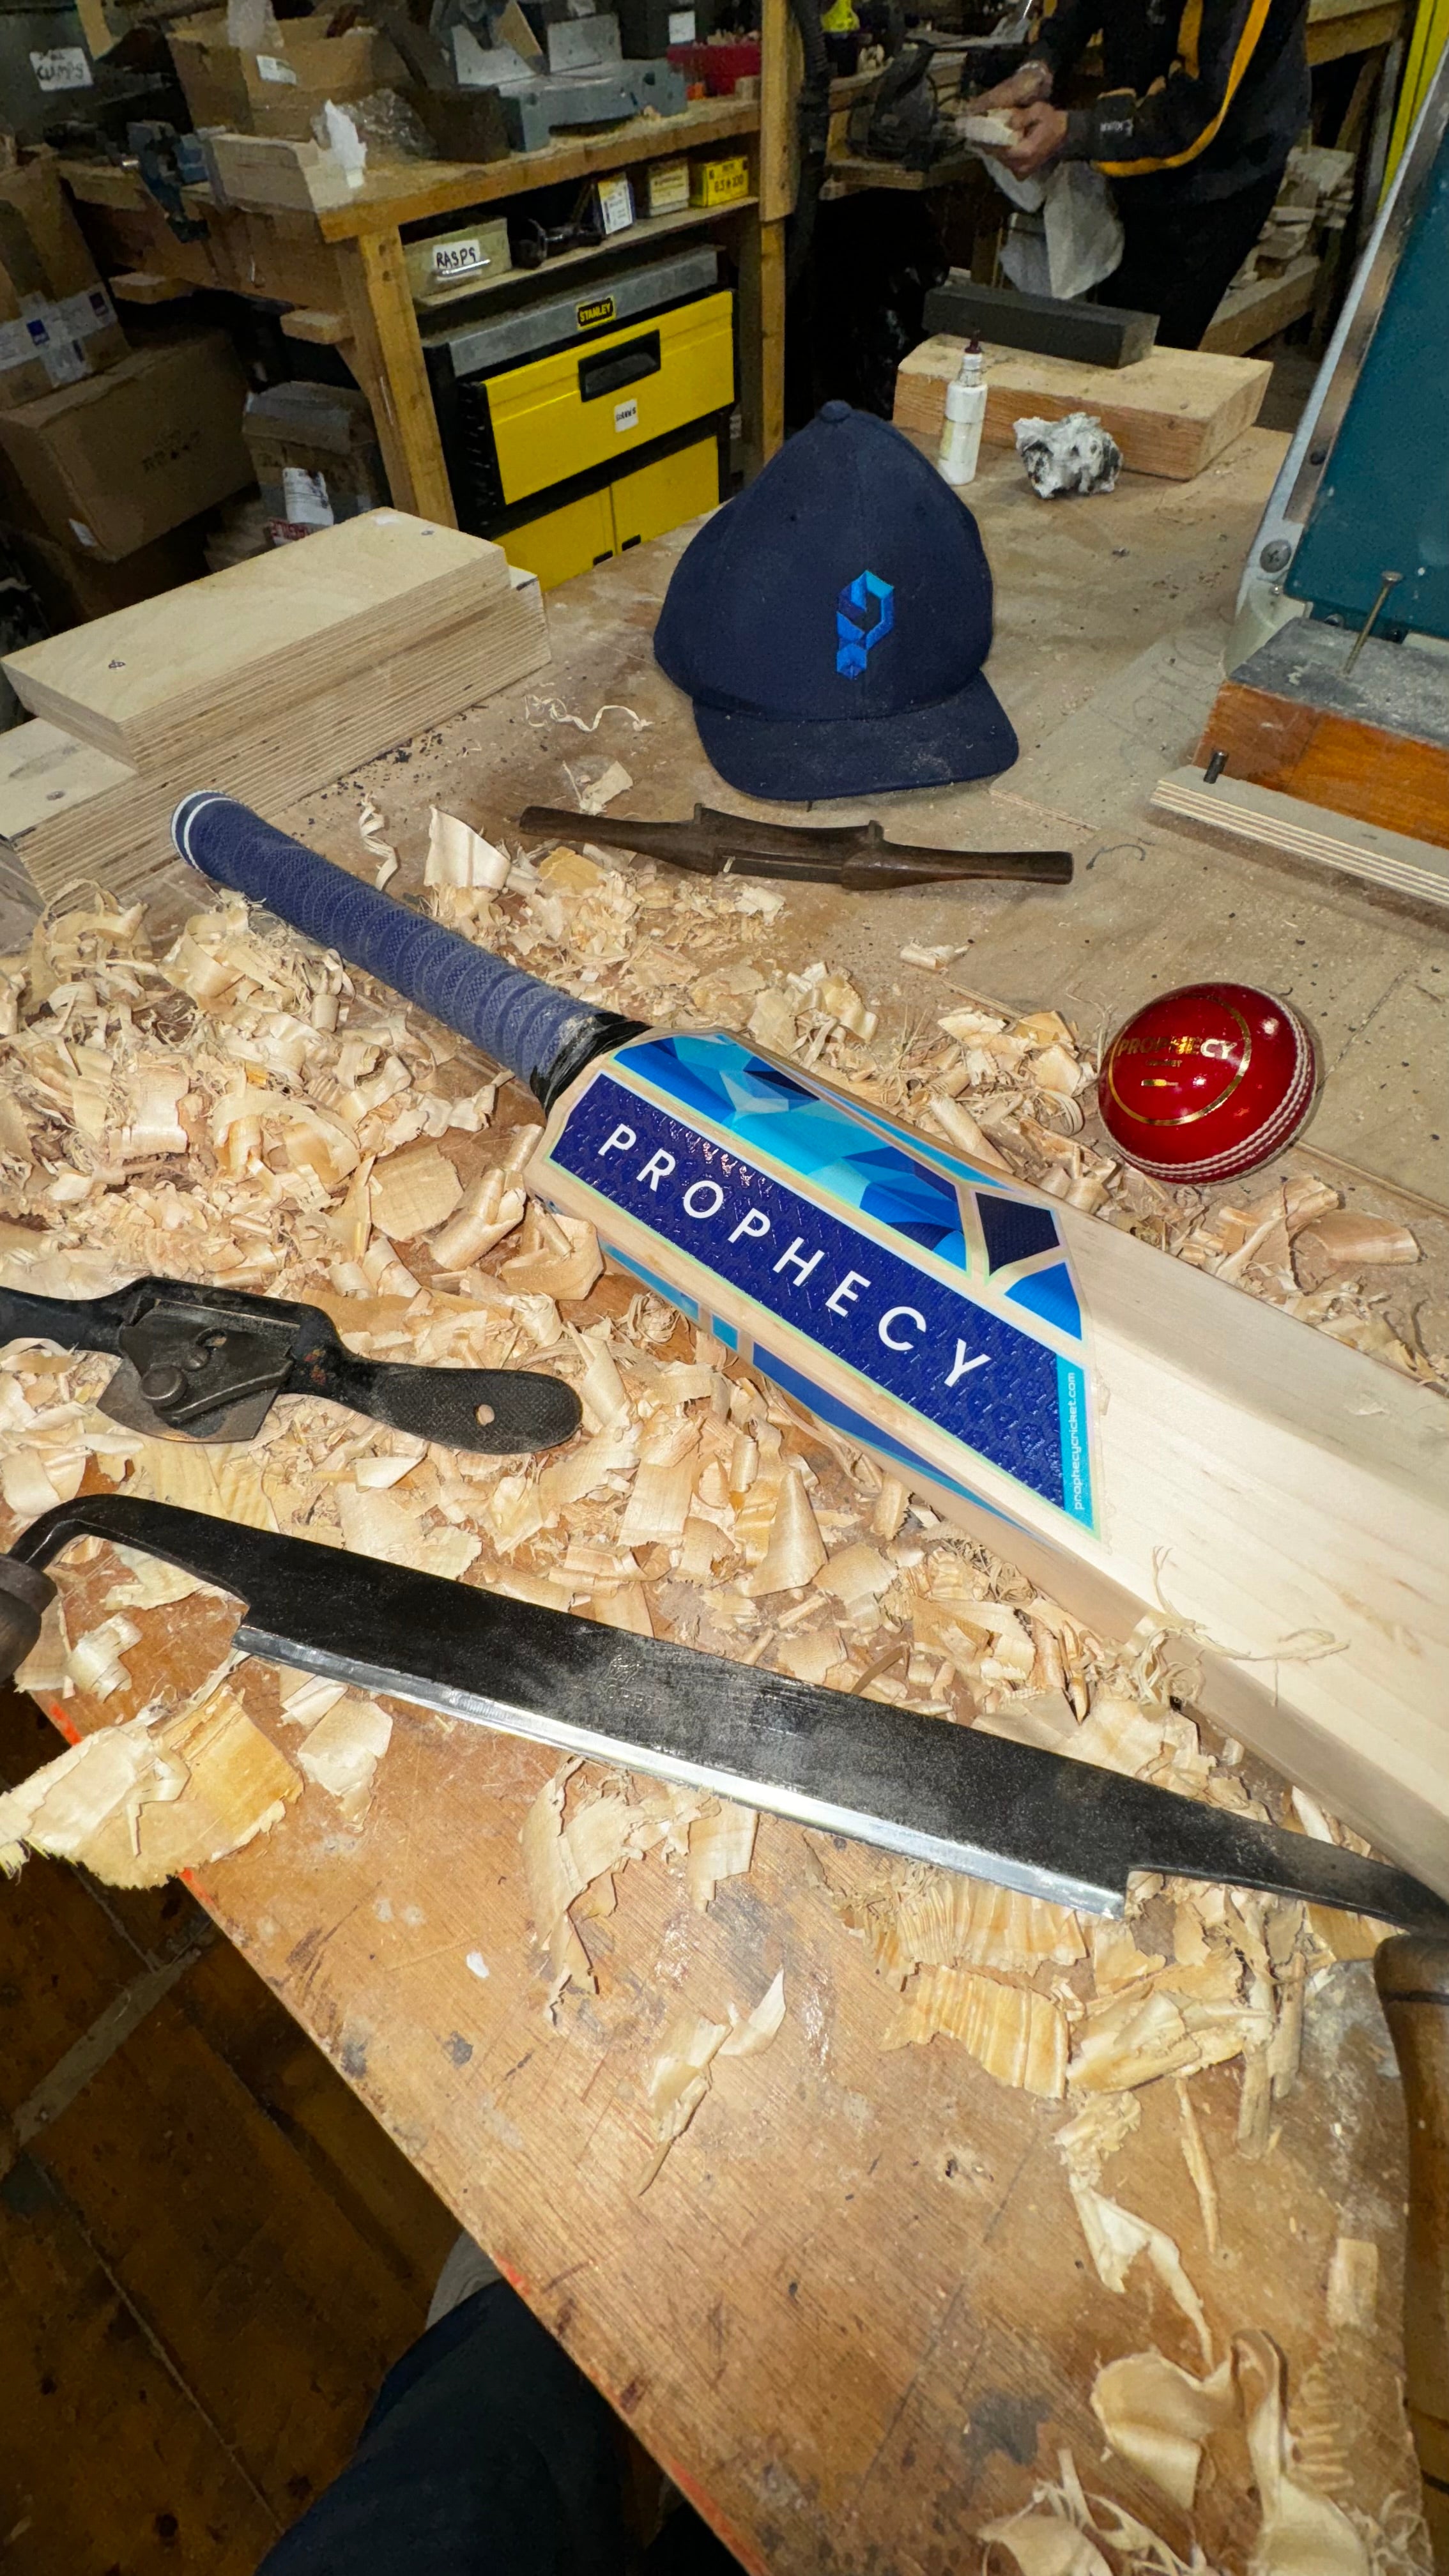 Where are Prophecy Cricket Bats Made